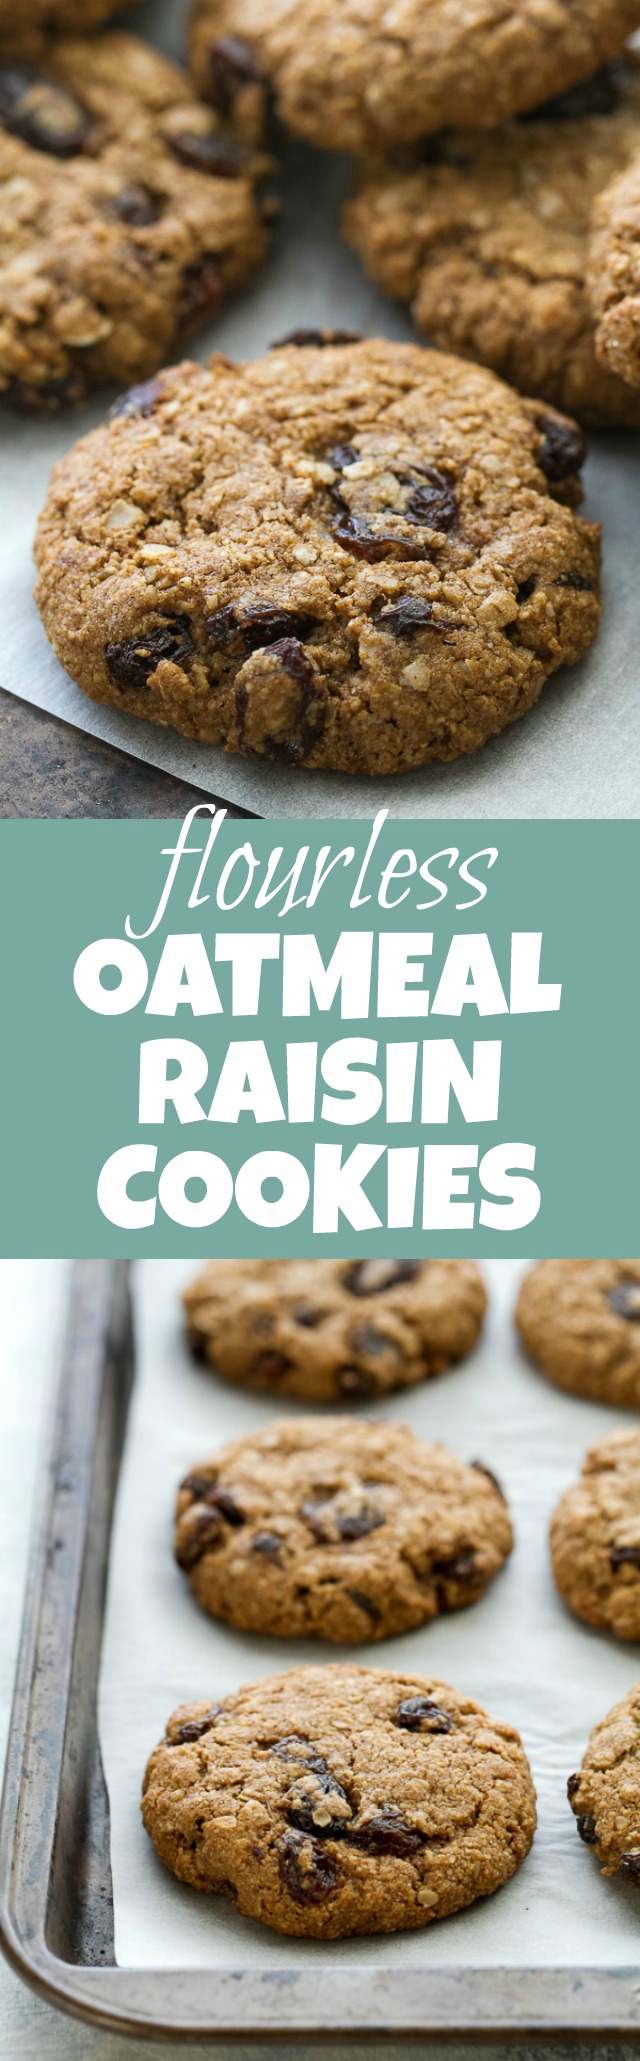 Flourless oatmeal raisin cookies that are soft, chewy, and super easy to make. They're comforting health food at its finest! | runningwithspoons.com